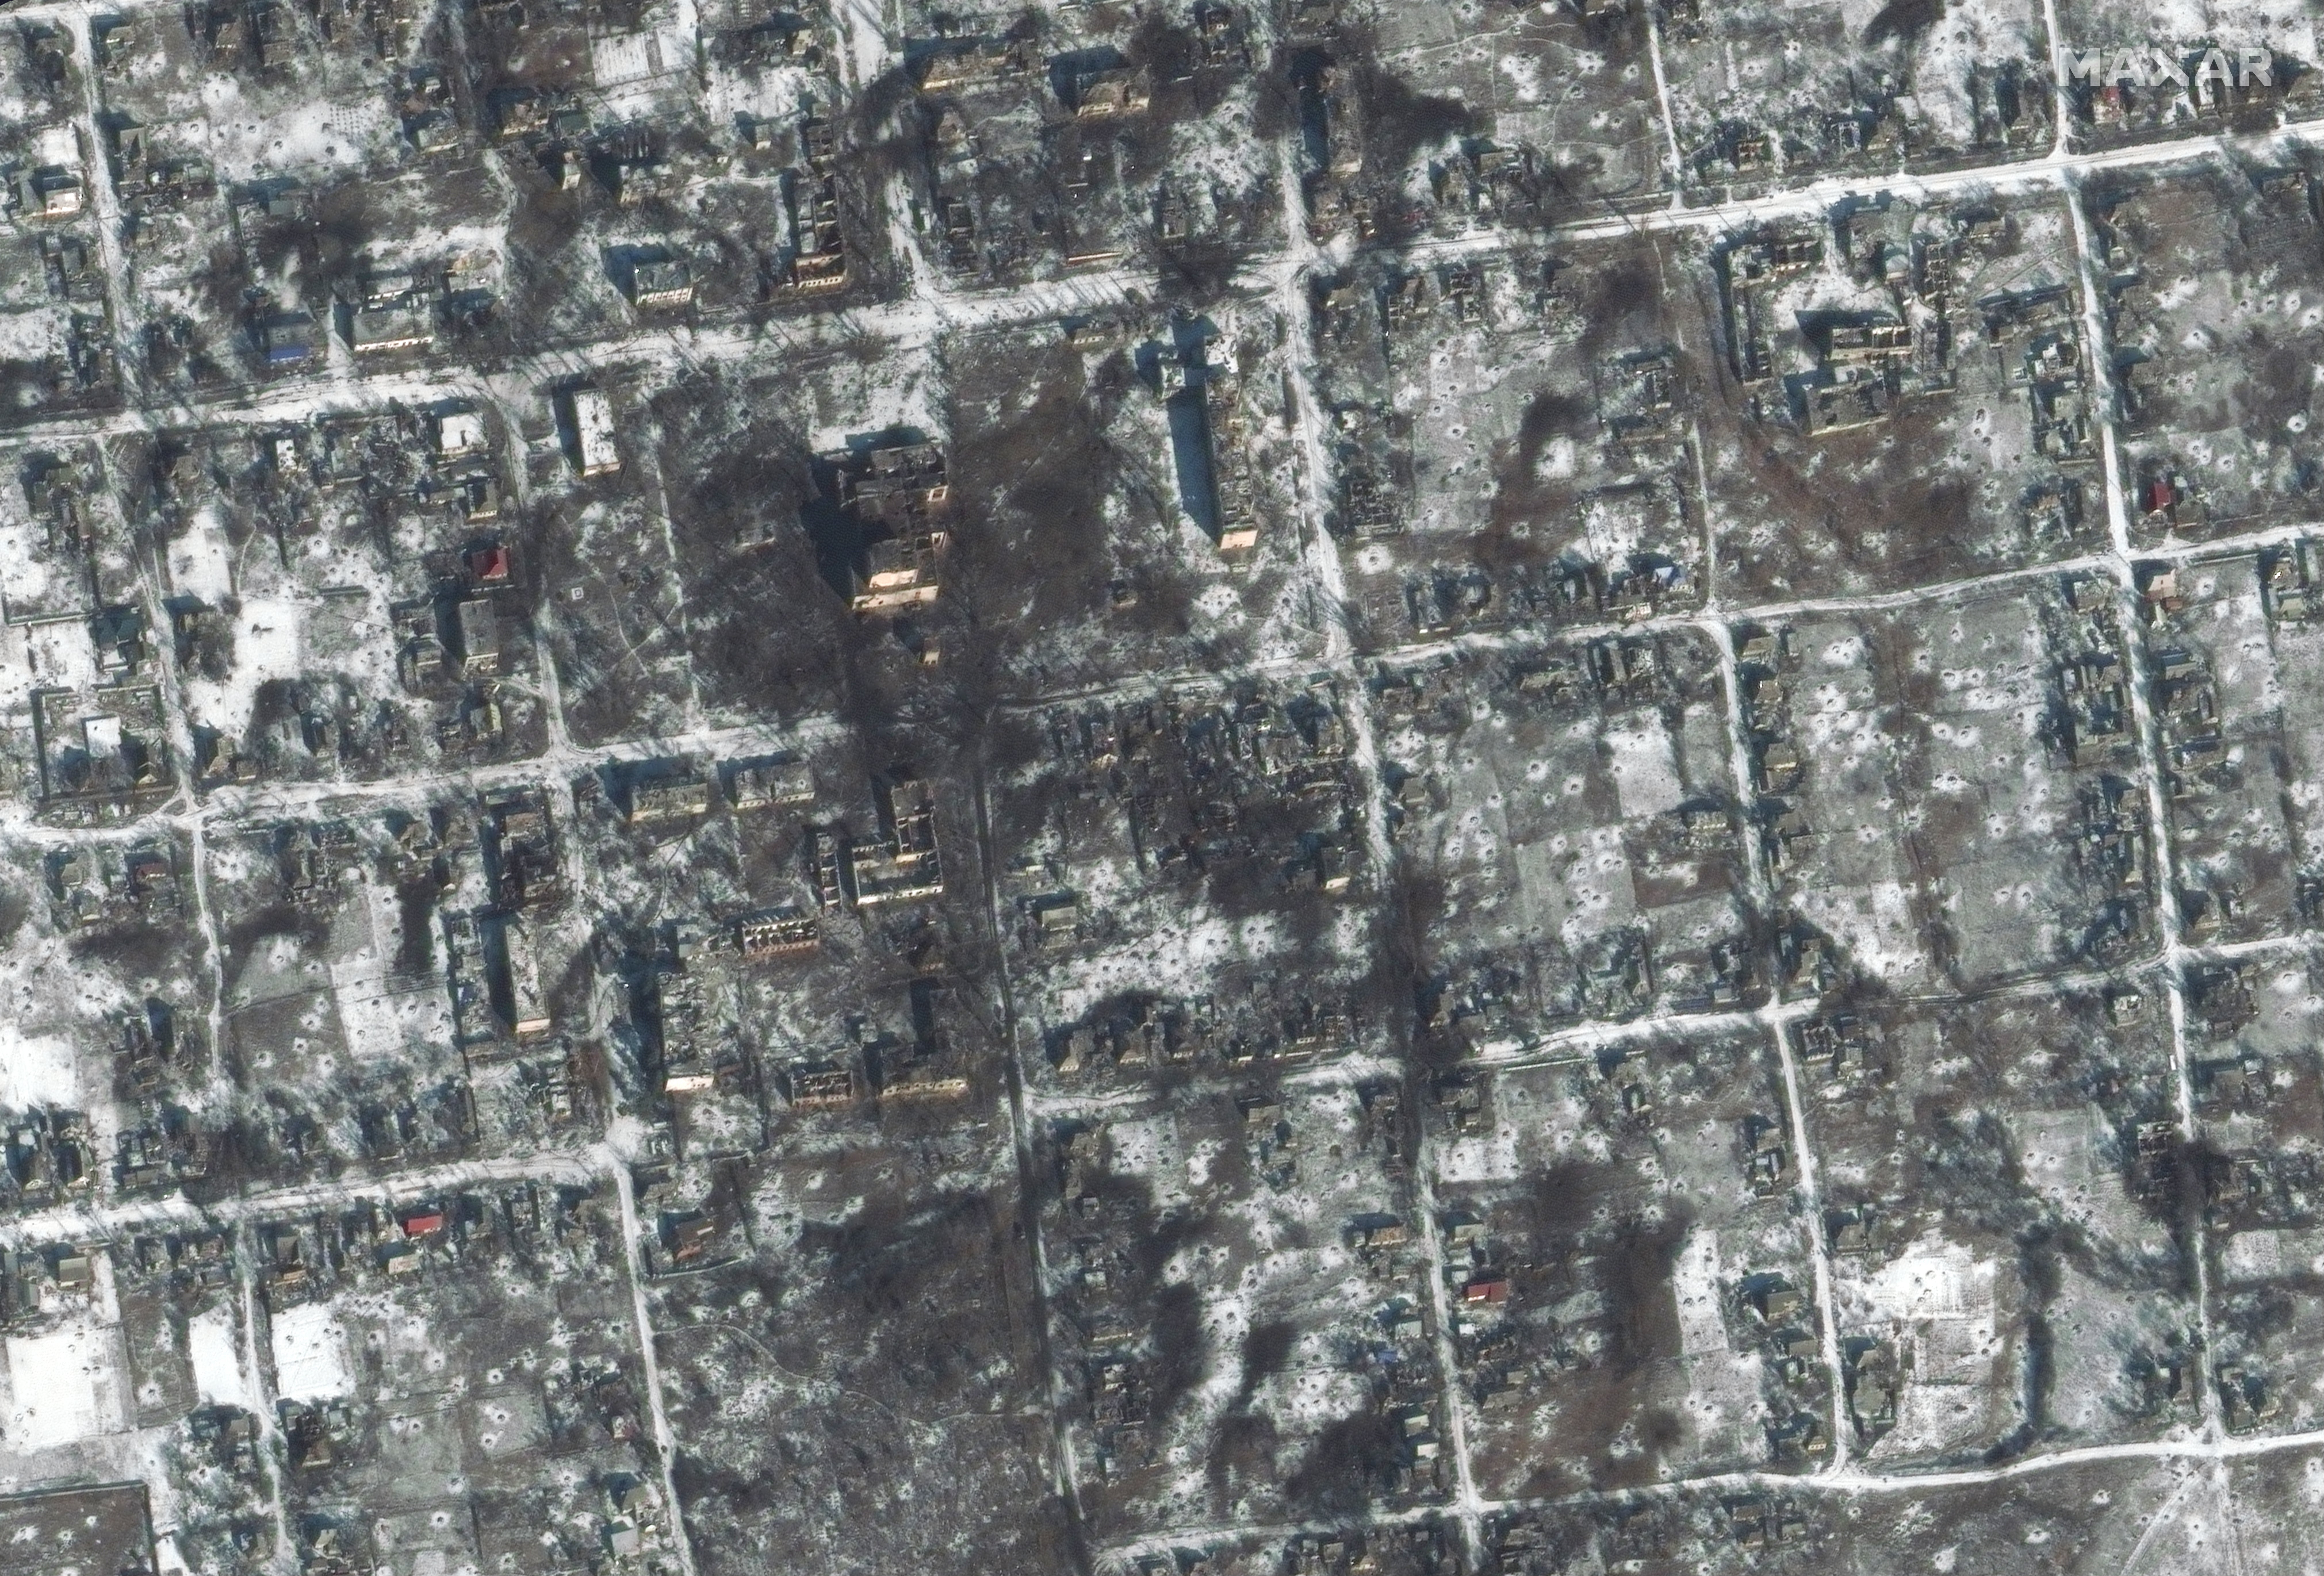 Images of Petrivka, Ukraine after intense shelling (picture captured on 10 February 2023)